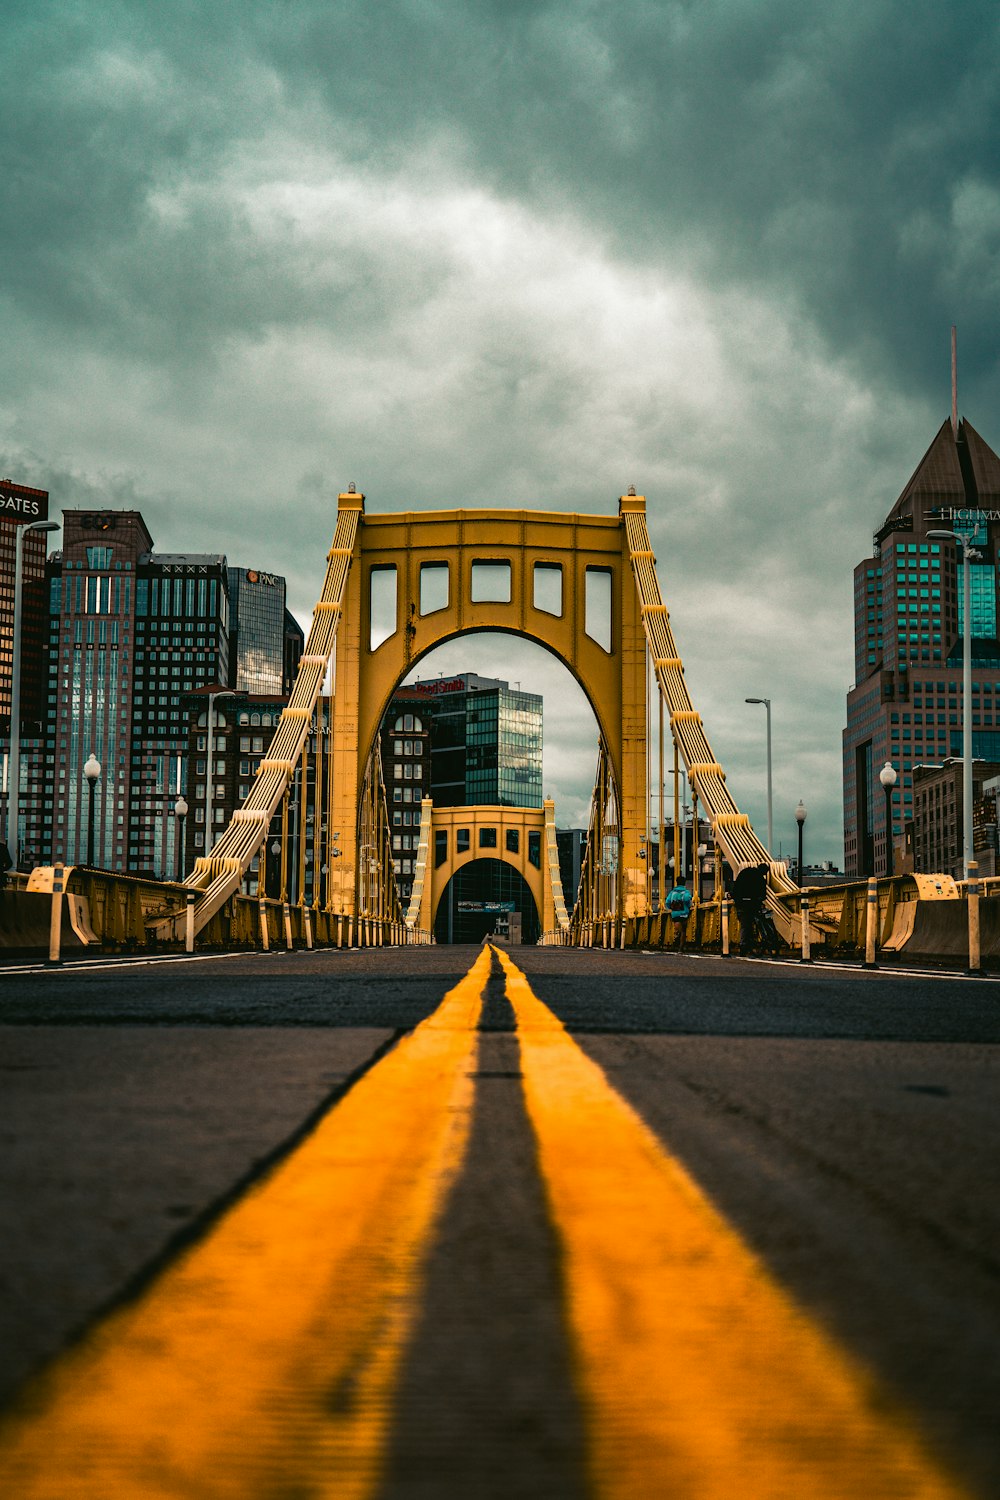 a yellow line on the road leading to a bridge